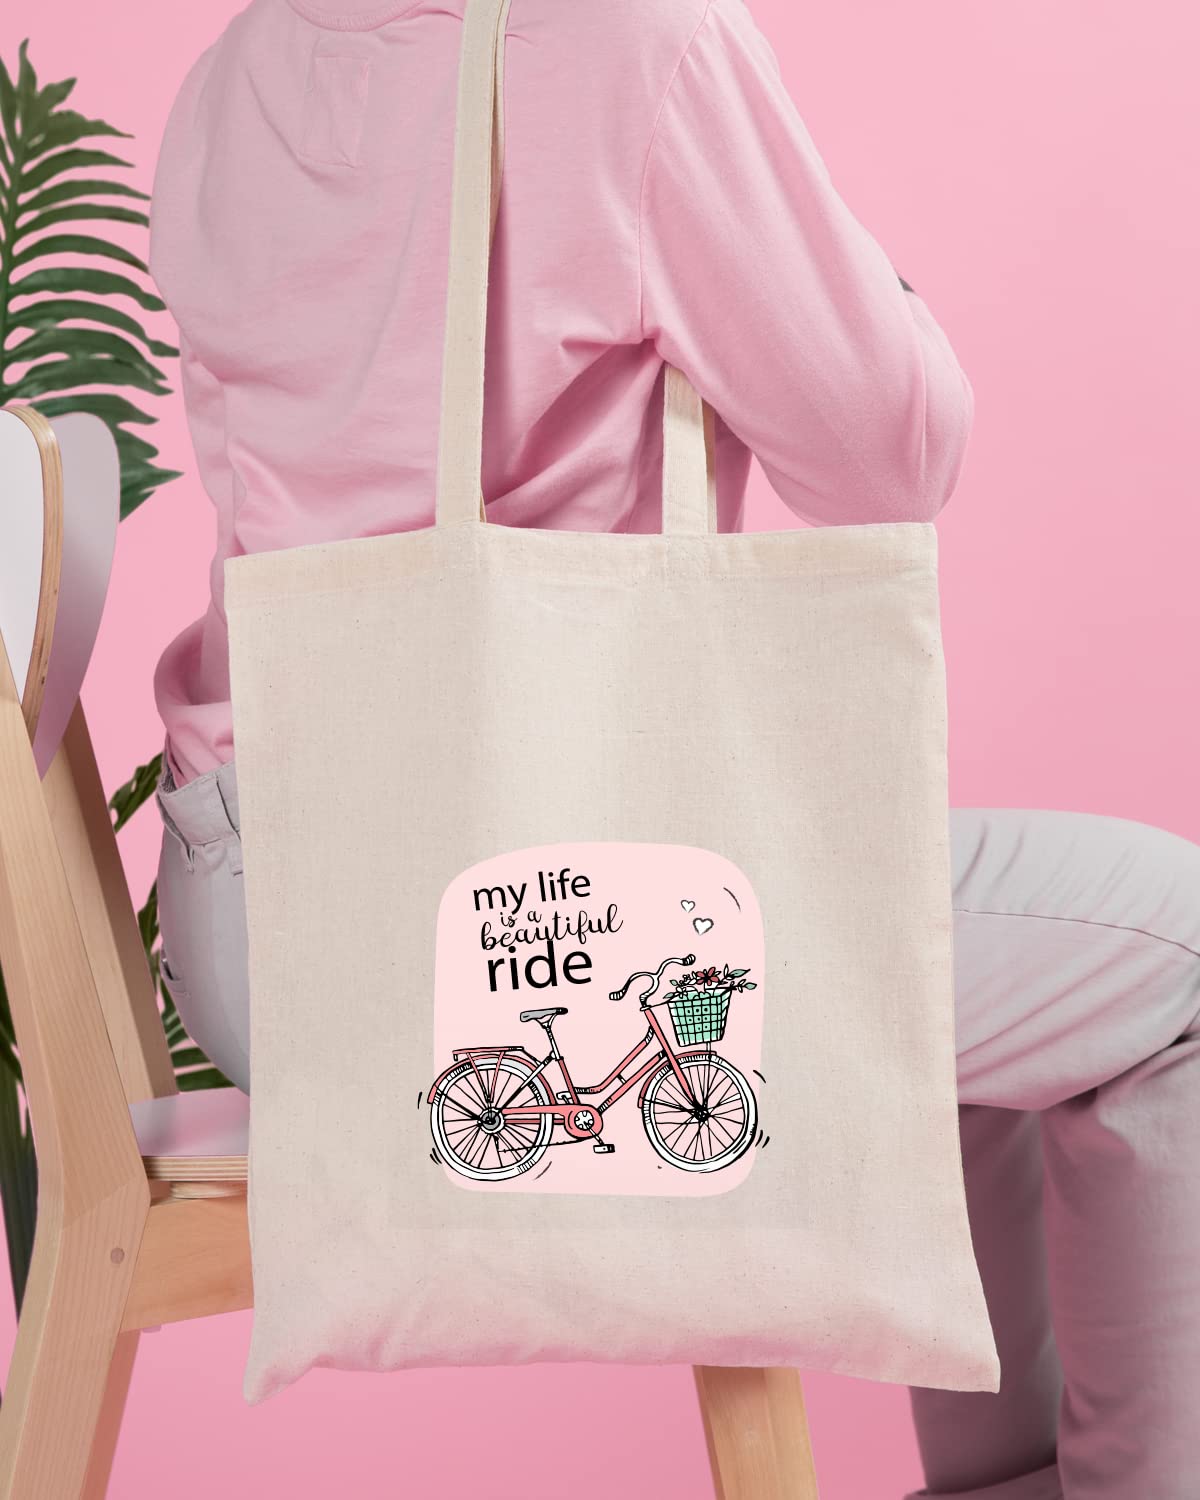 The Pink Magnet Life Is A Beautiful Ride Tote Bag - Canvas Tote Bag for Women | Printed Multipurpose Cotton Bags | Cute Hand Bag for Girls | Best for College, Travel, Grocery | Reusable Shopping Bag | Eco-Friendly Tote Bag